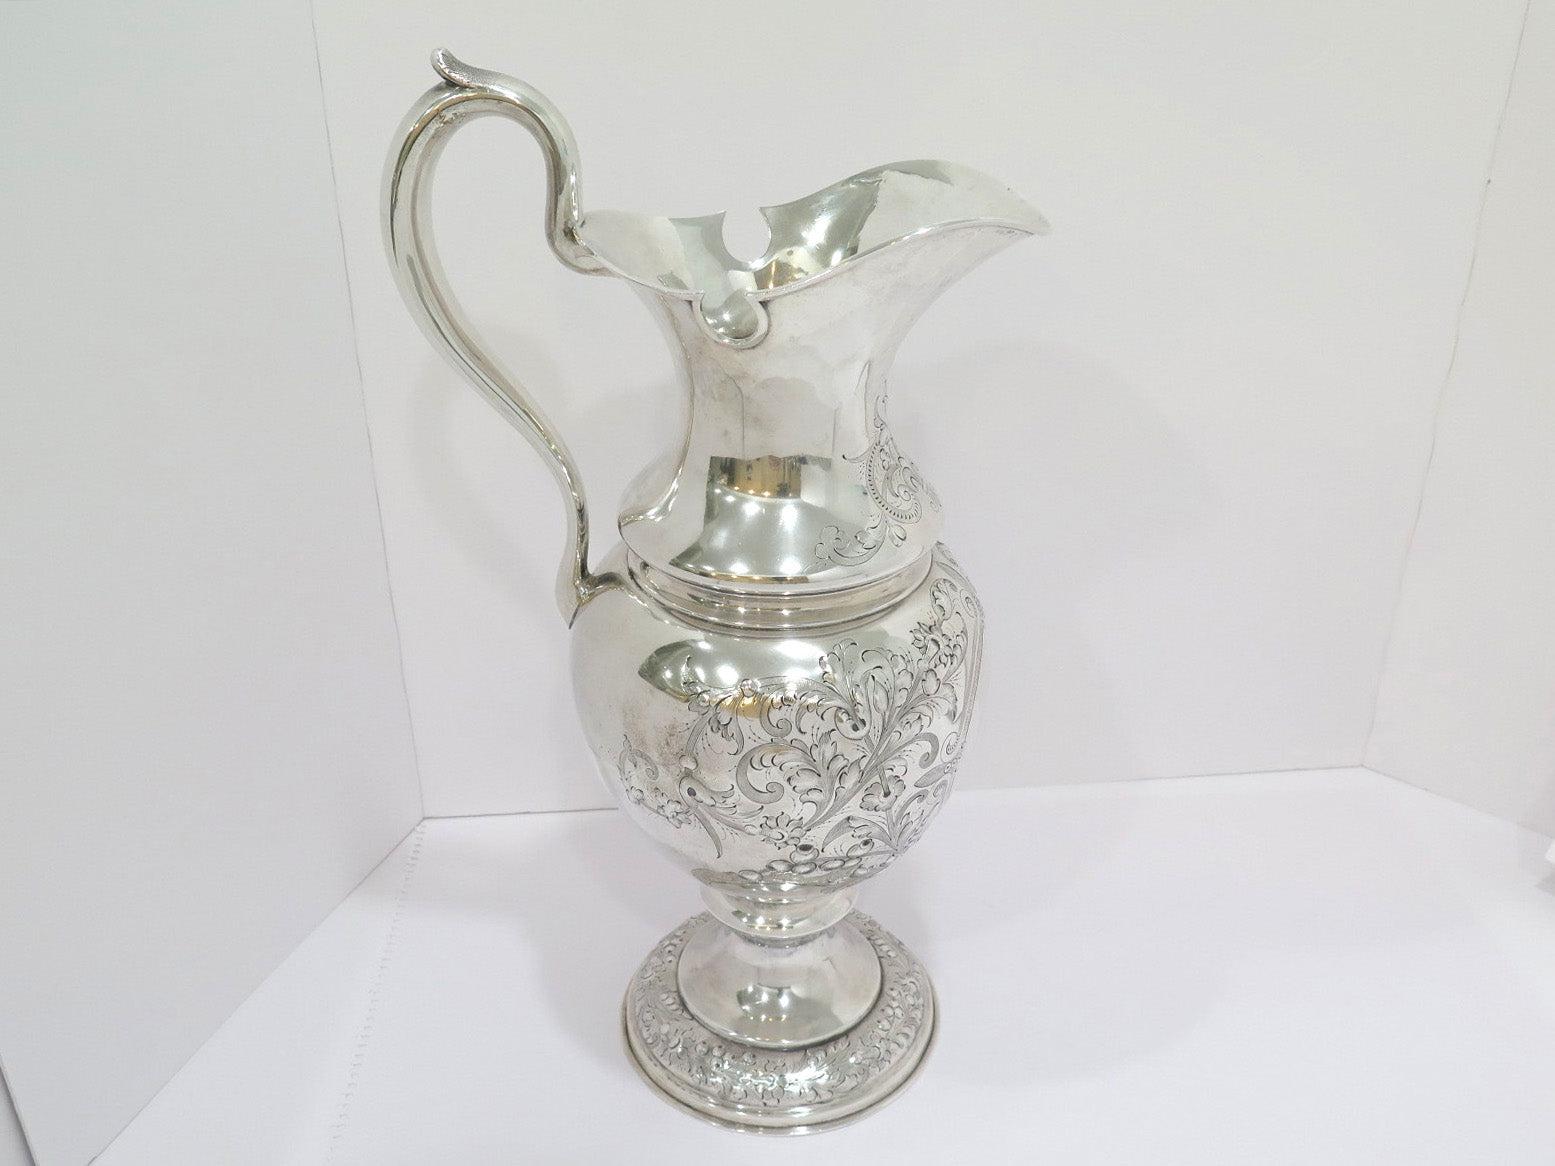 American Sterling Silver Duhme & Co. Antique Floral Repousse Pitcher For Sale